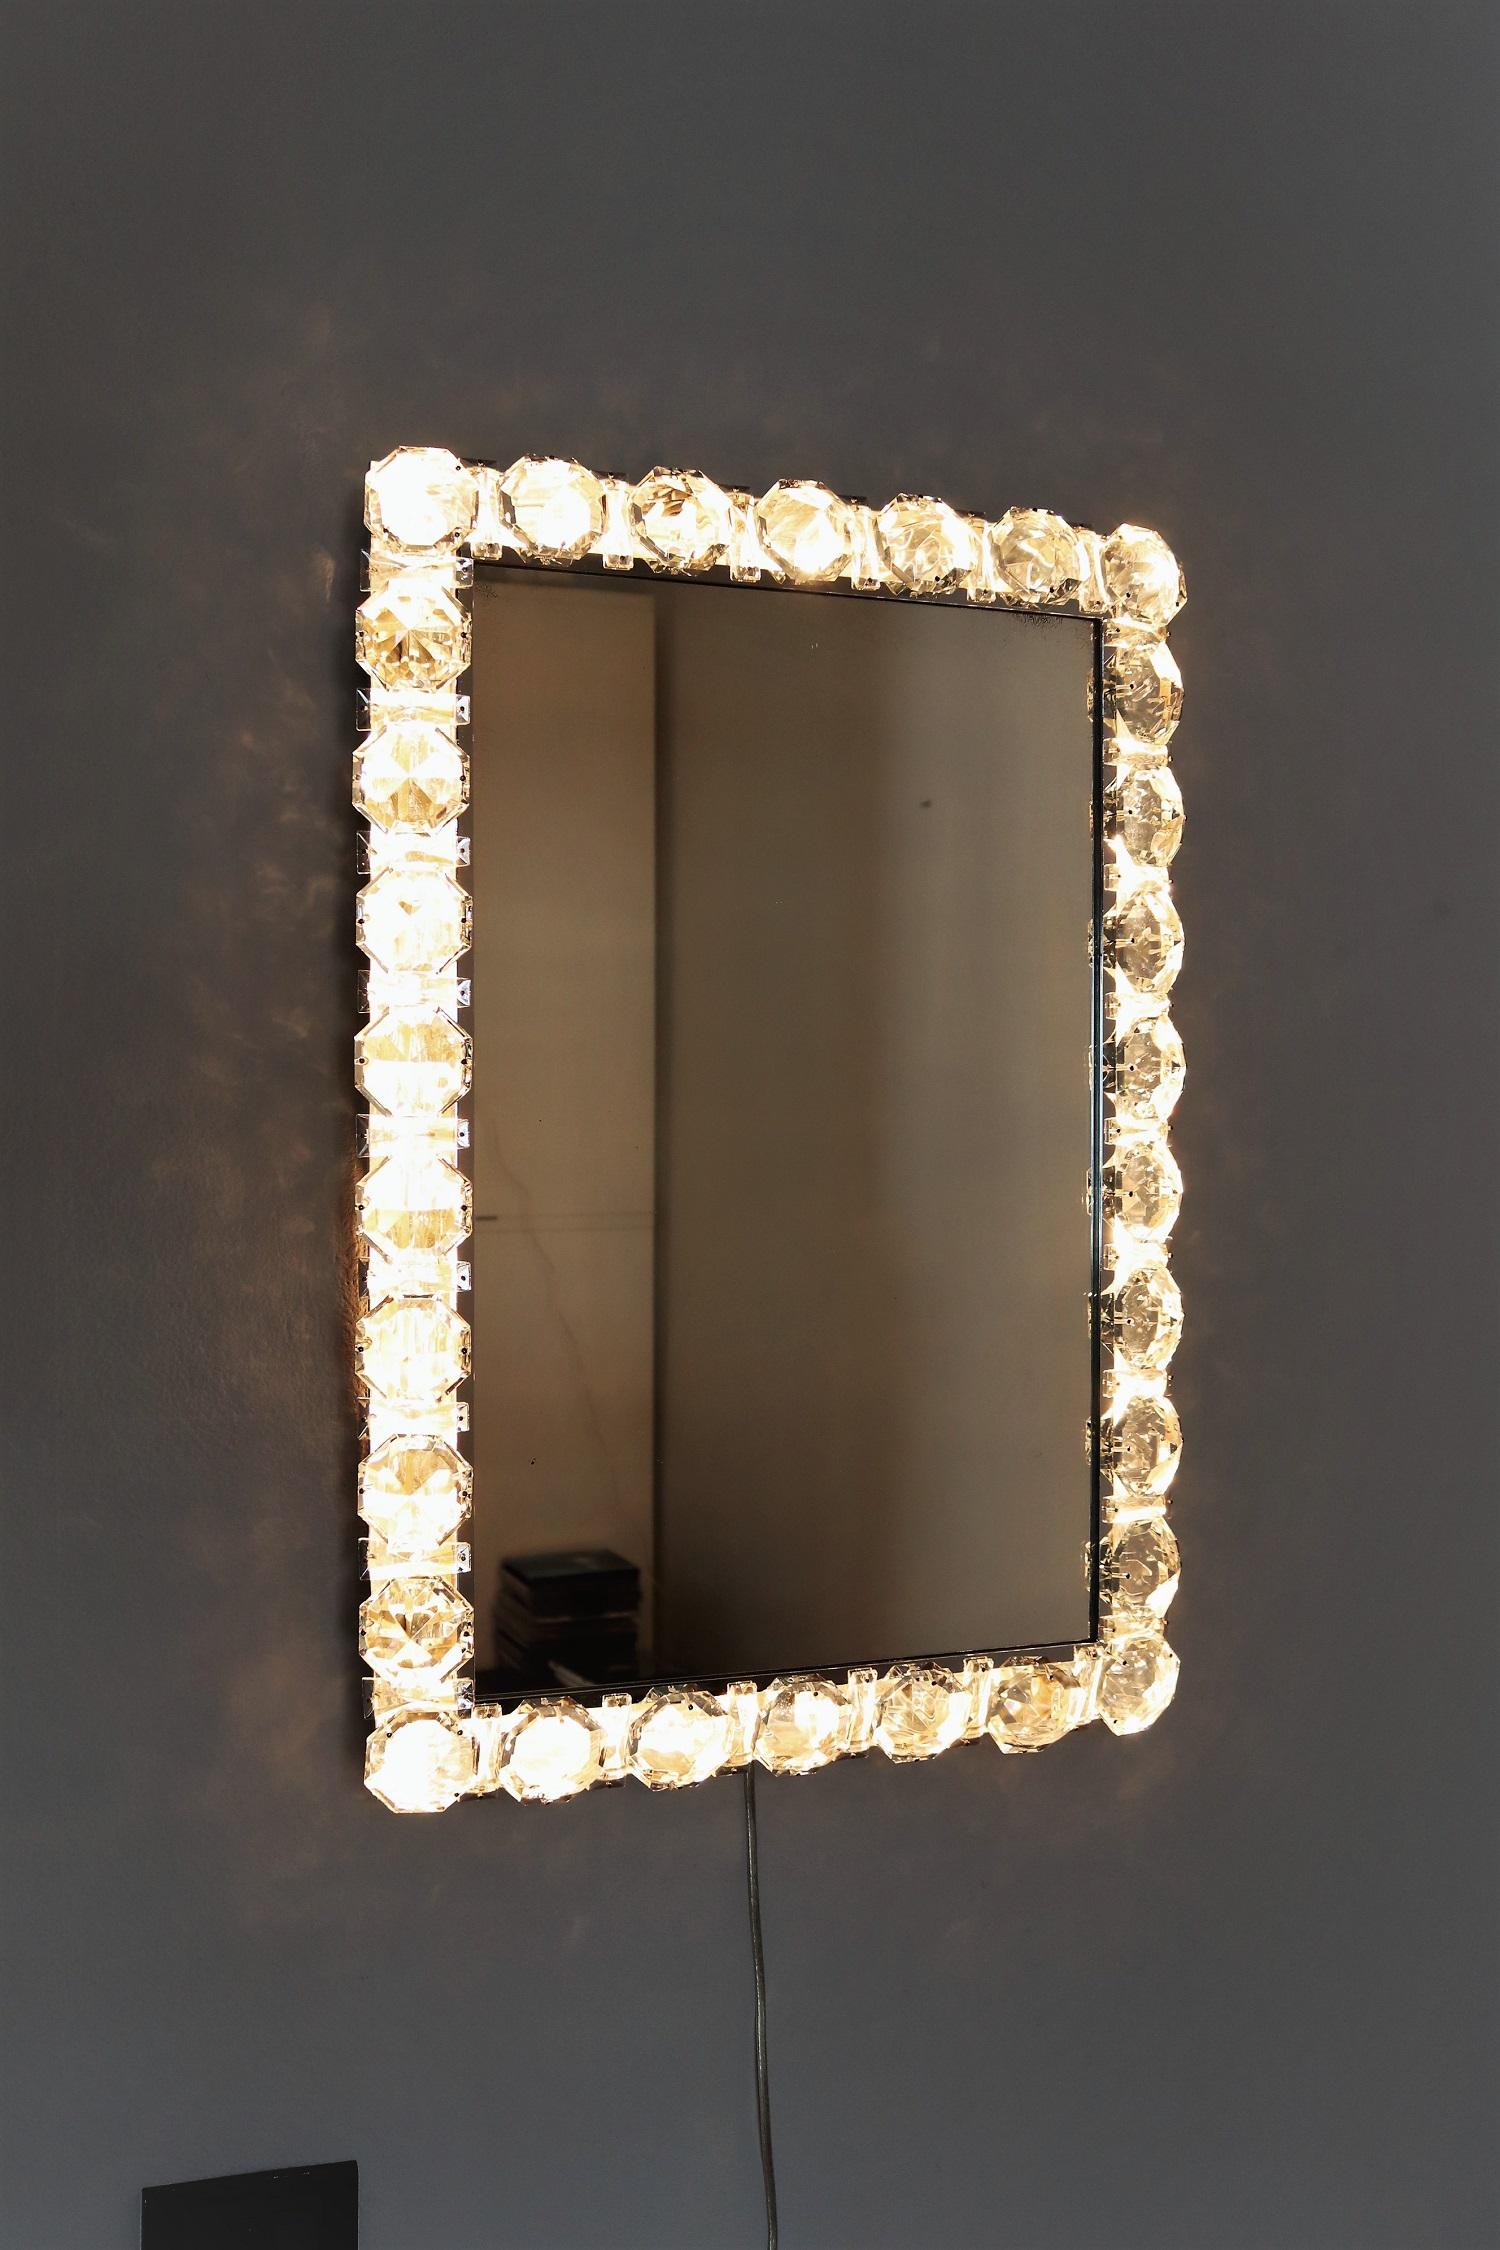 A real luxury wall mirror with many big size (2,4in or 6 cm) shiny crystals around the chrome-plated rounded mirror frame with inbetween smaller square crystals.
The mirror can be illuminated from inside and creates a gorgeous brilliant light. Much